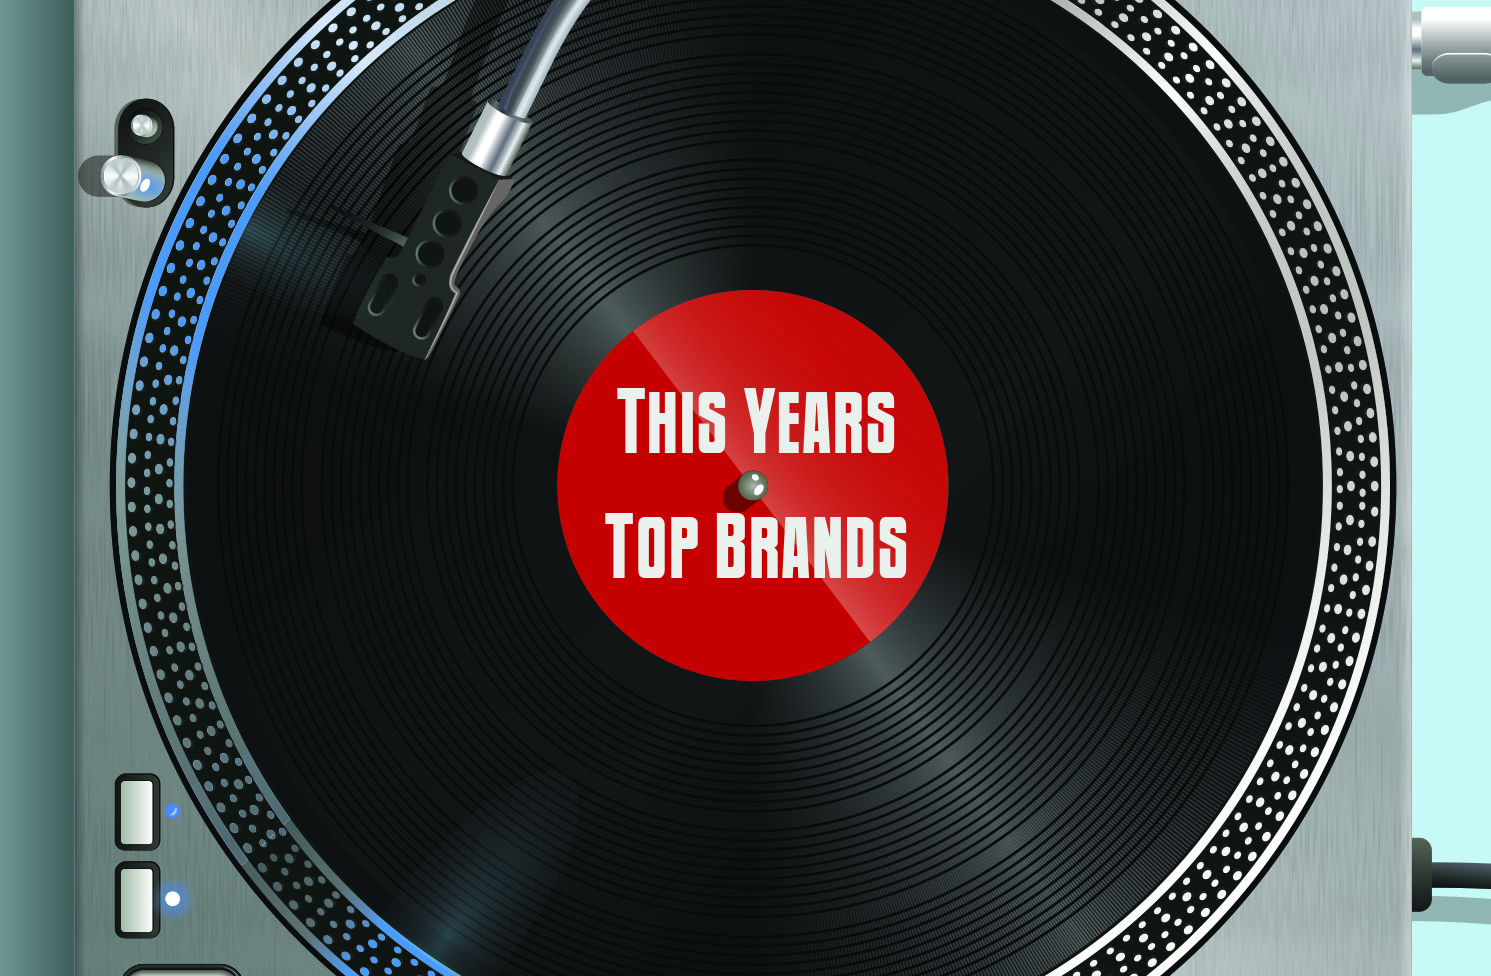 July 2018 Digital Issue: Mid Year Review, Top Brands of 2018